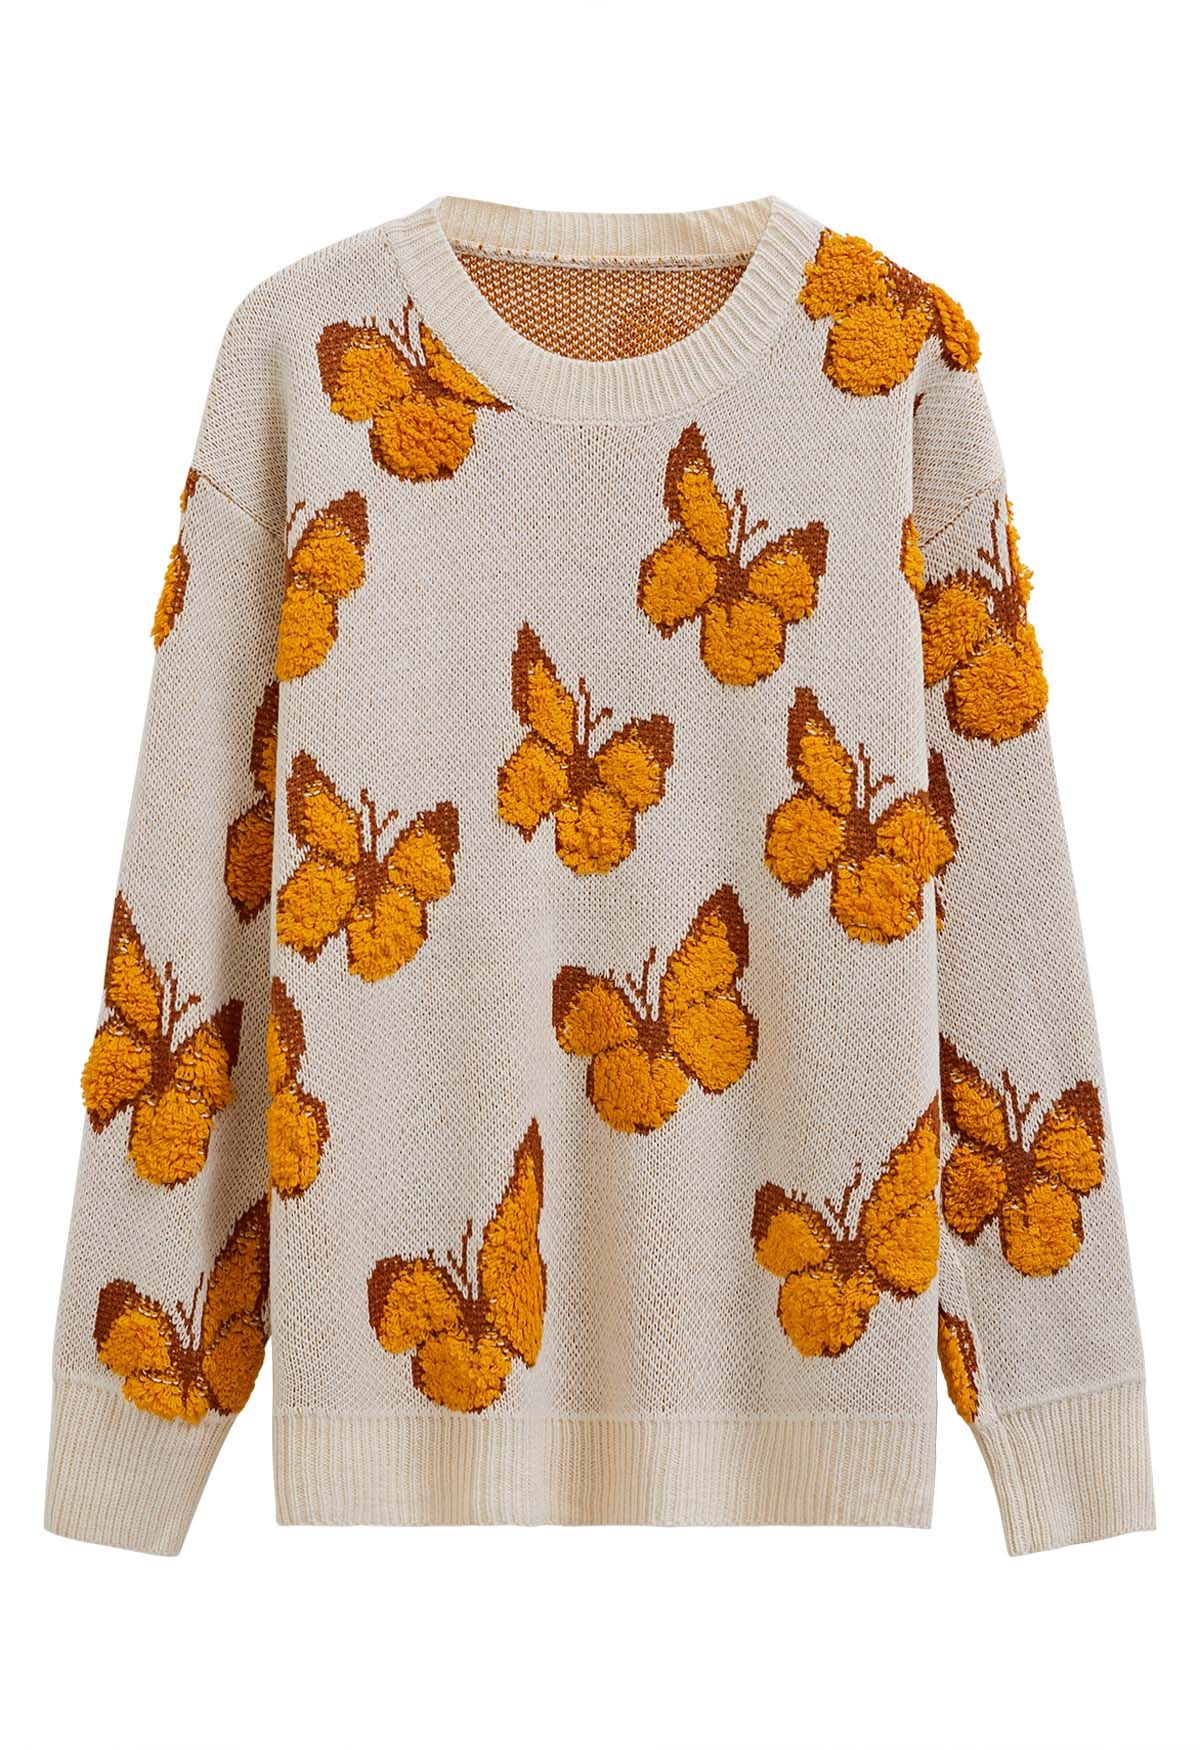 VINTAGE LOOK BUTTERFLIES SWEATER CLIP BY JUMBL  Fashion, Butterfly sweater,  Outfit accessories